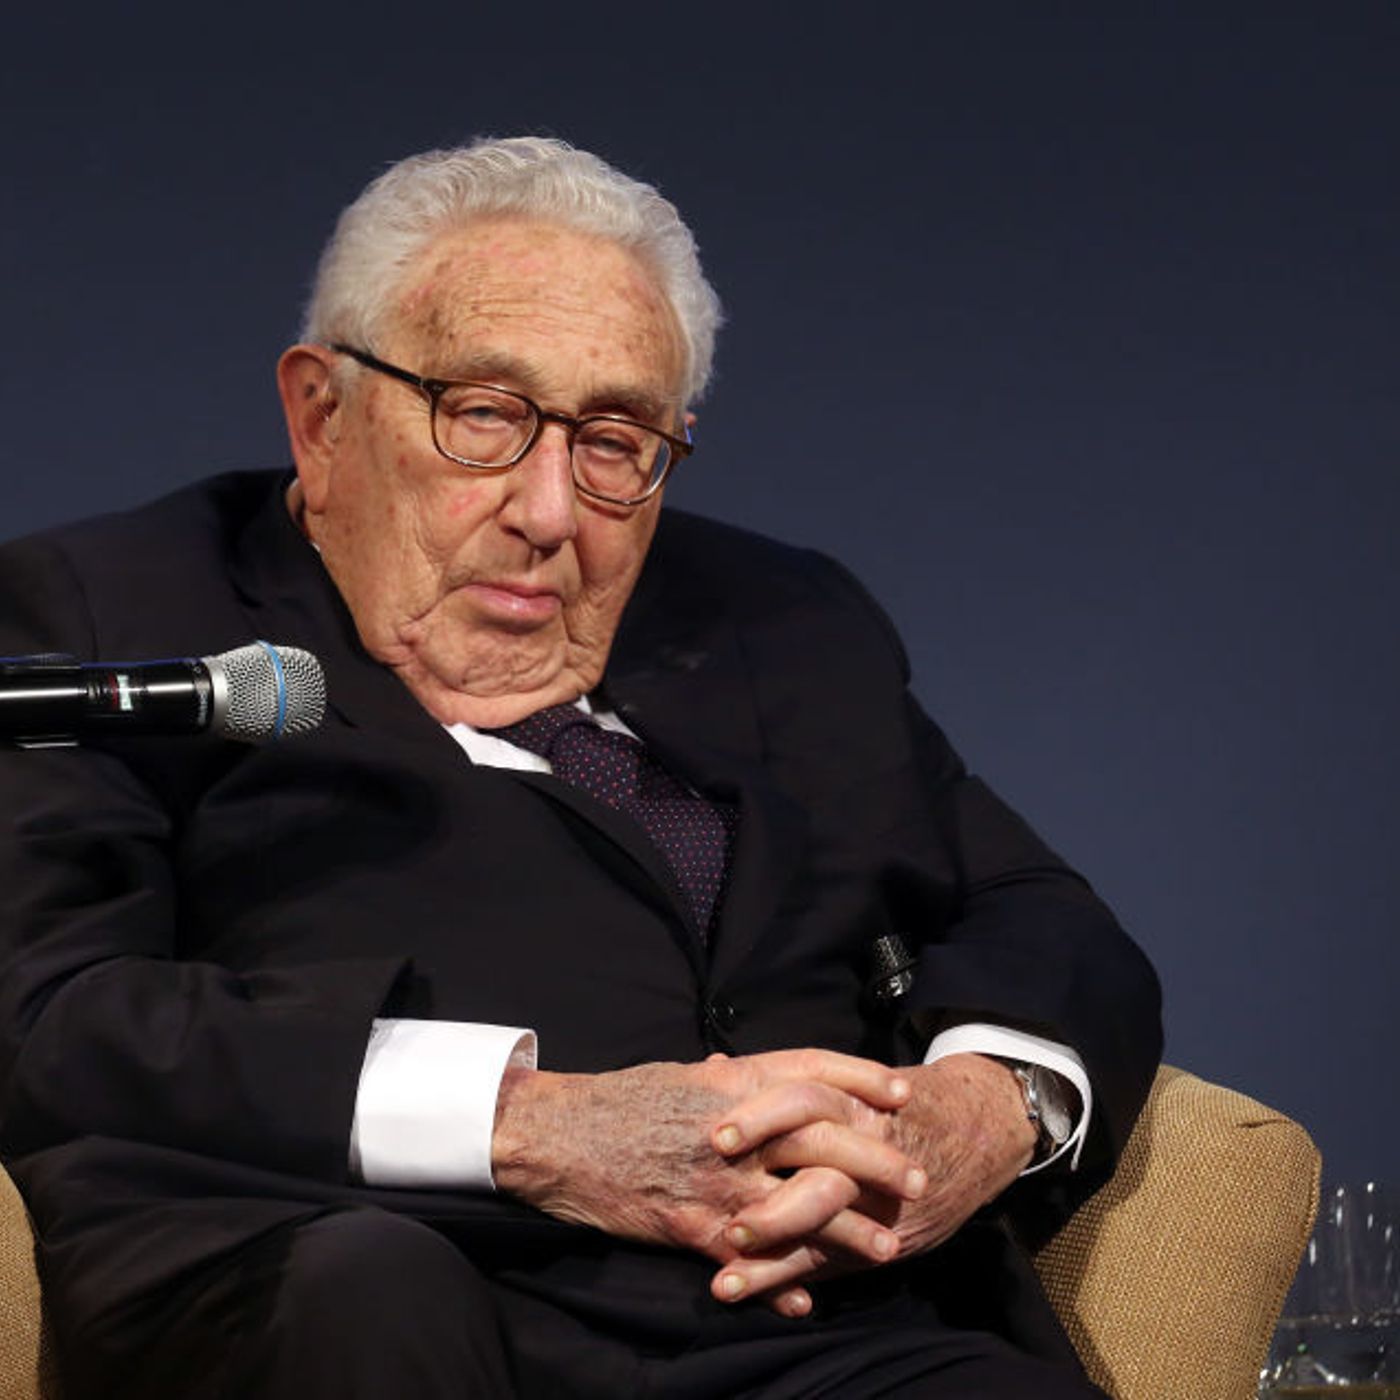 Is Kissinger right about Ukraine?